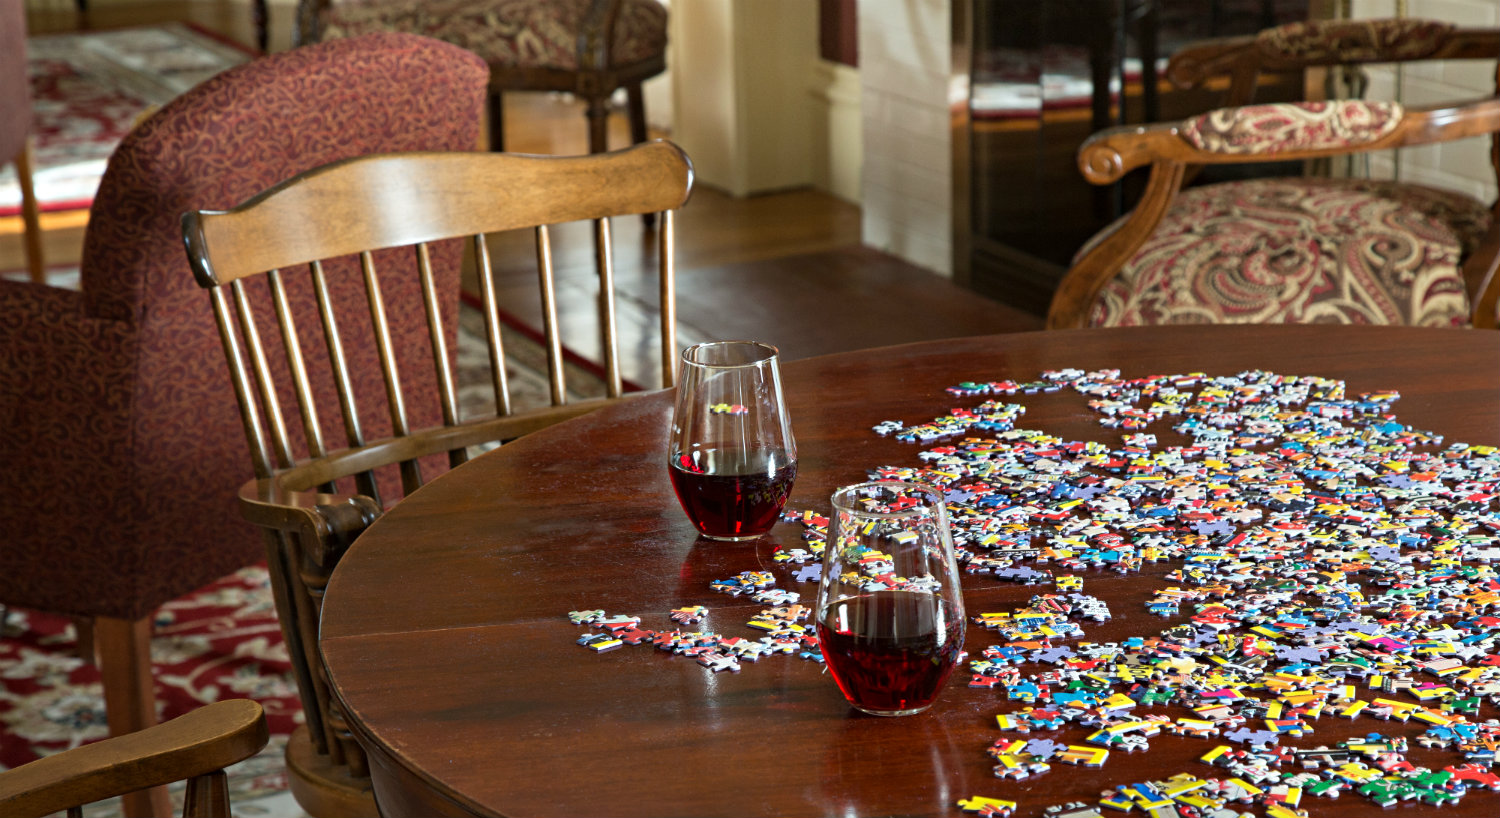 A puzzle is laid out on a wooden table with two stemless wine glasses.